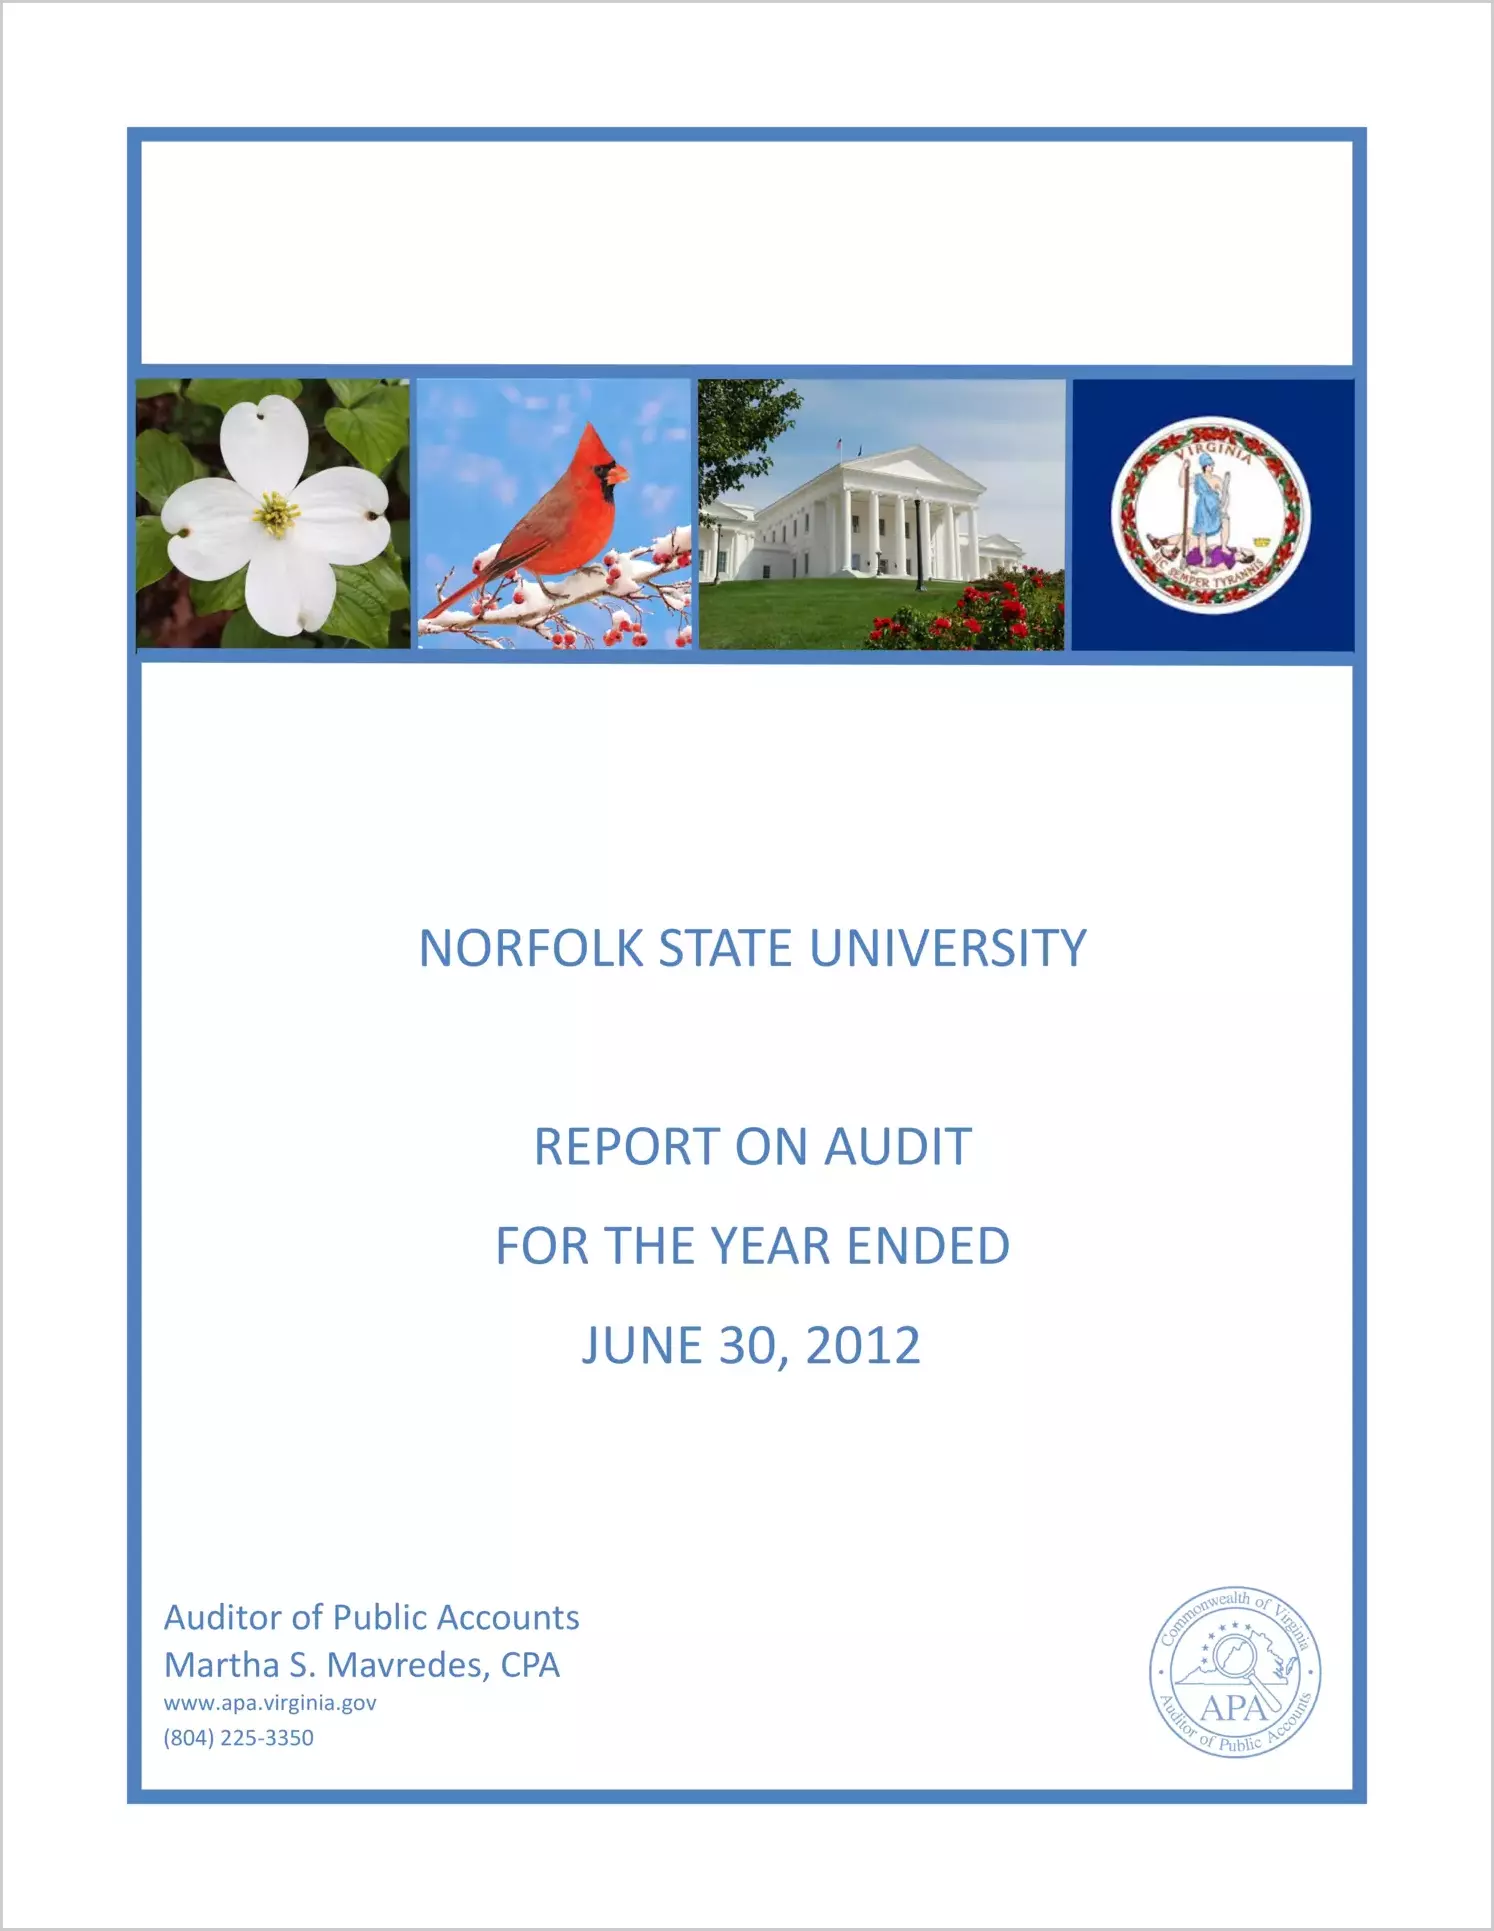 Norfolk State University report on audit for the year ended June 30, 2012